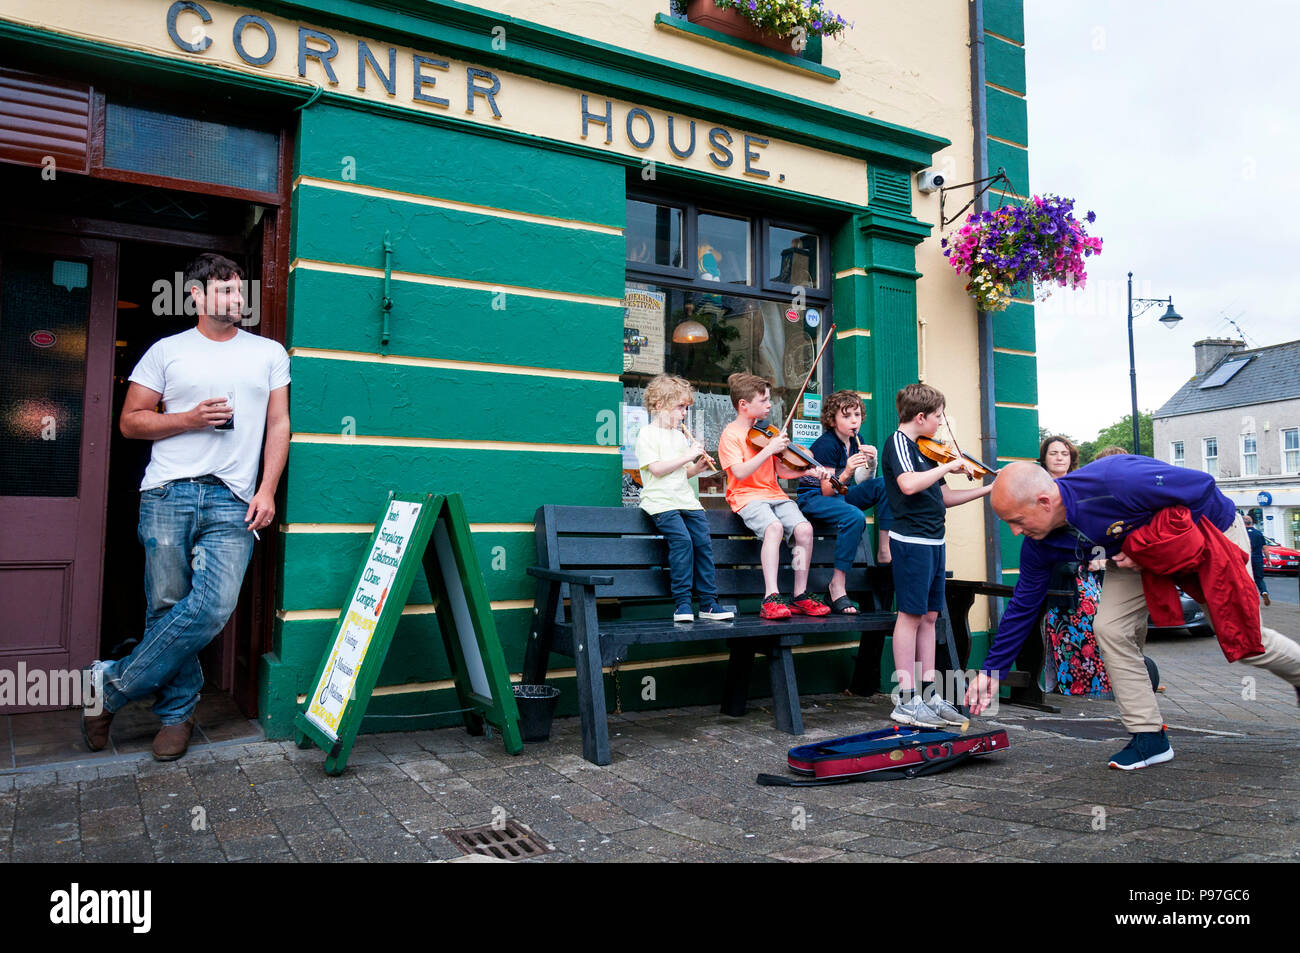 Ardara, County Donegal, Ireland. 15th July 2018. Young musicians keep up the traditions in the street outside of a bar in Ireland's north-west. Traditional Irish music has a long history here. Credit: Richard Wayman/Alamy Live News Stock Photo